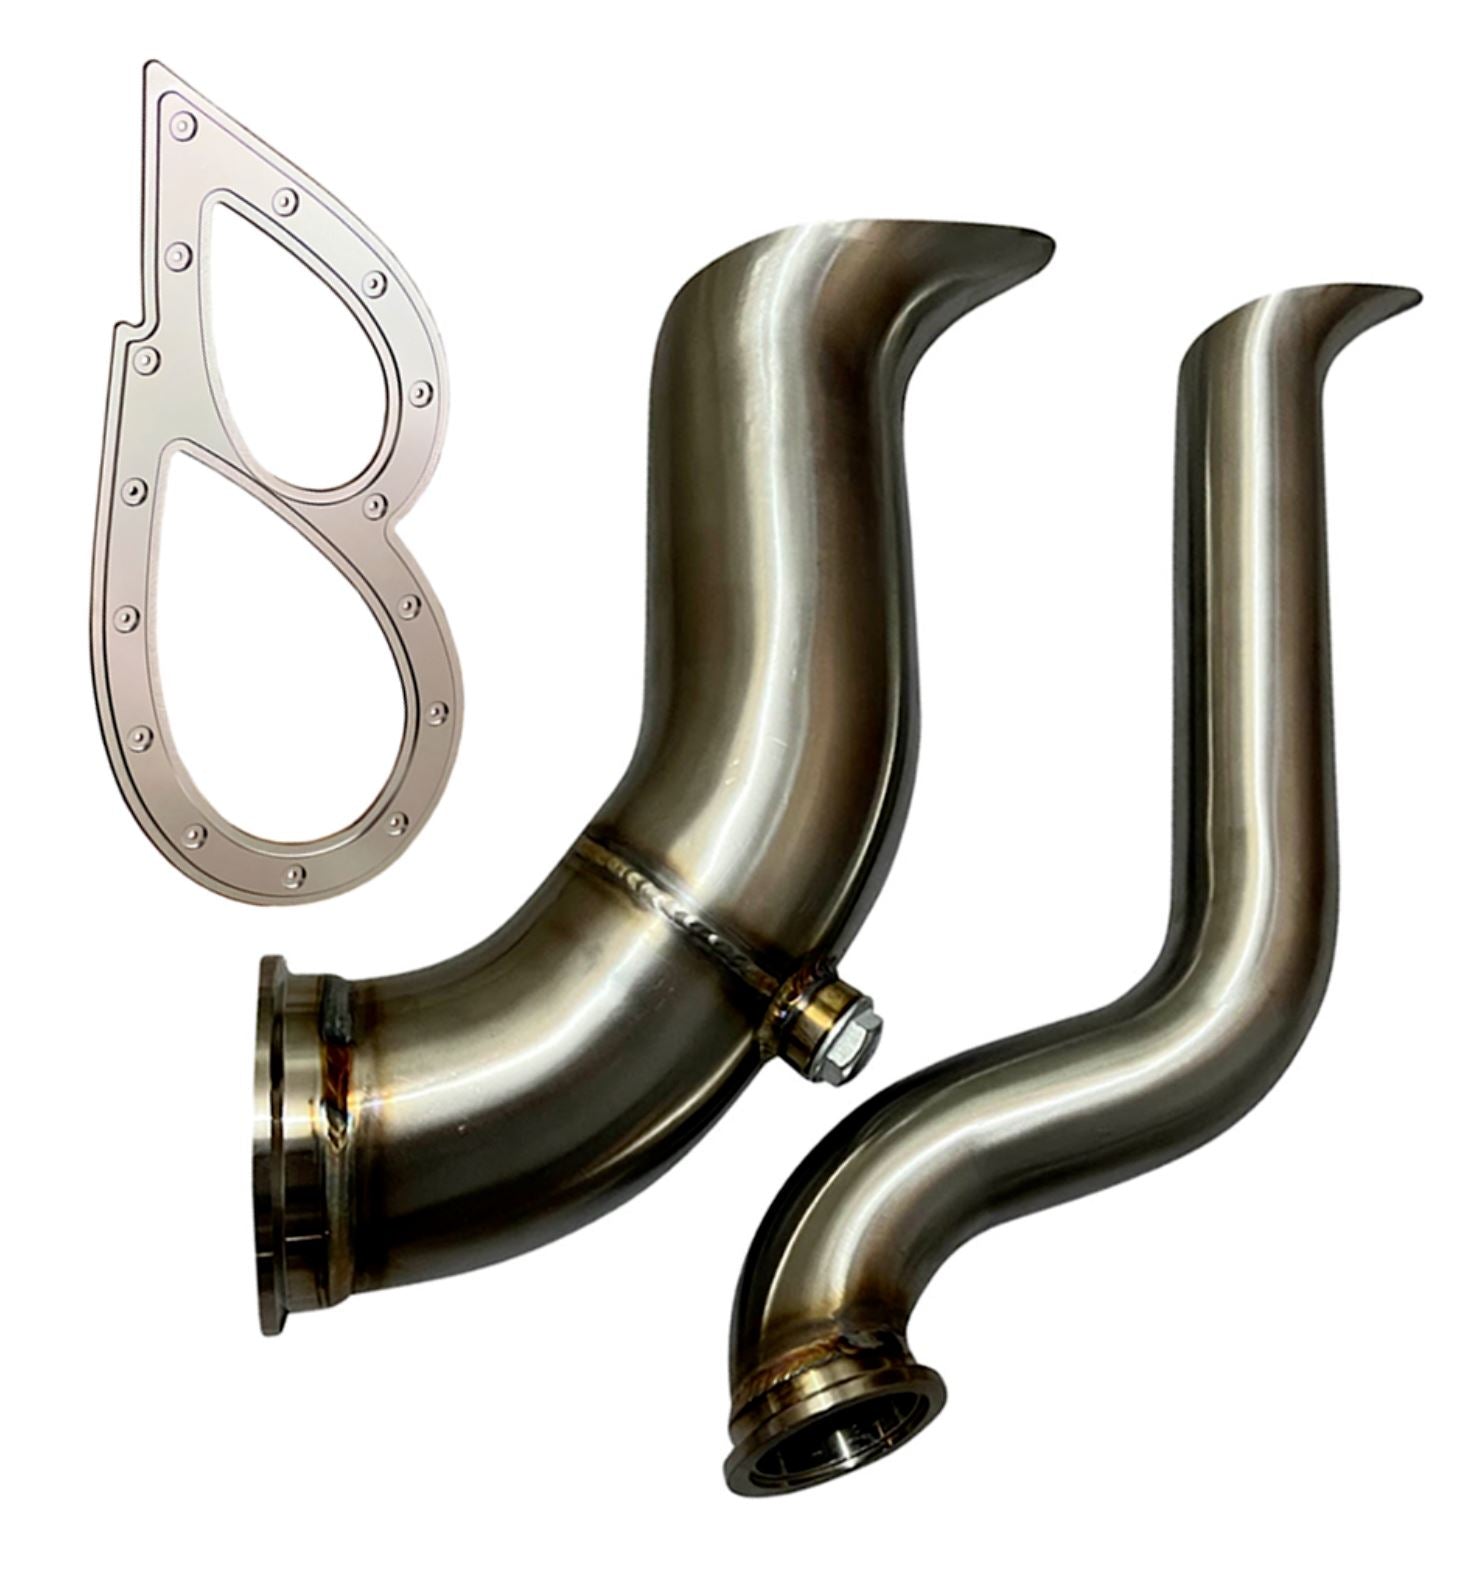 B Series Tear Drop Hood Exit Up Pipe Dump Tube for Top Mount Turbo Manifold USA